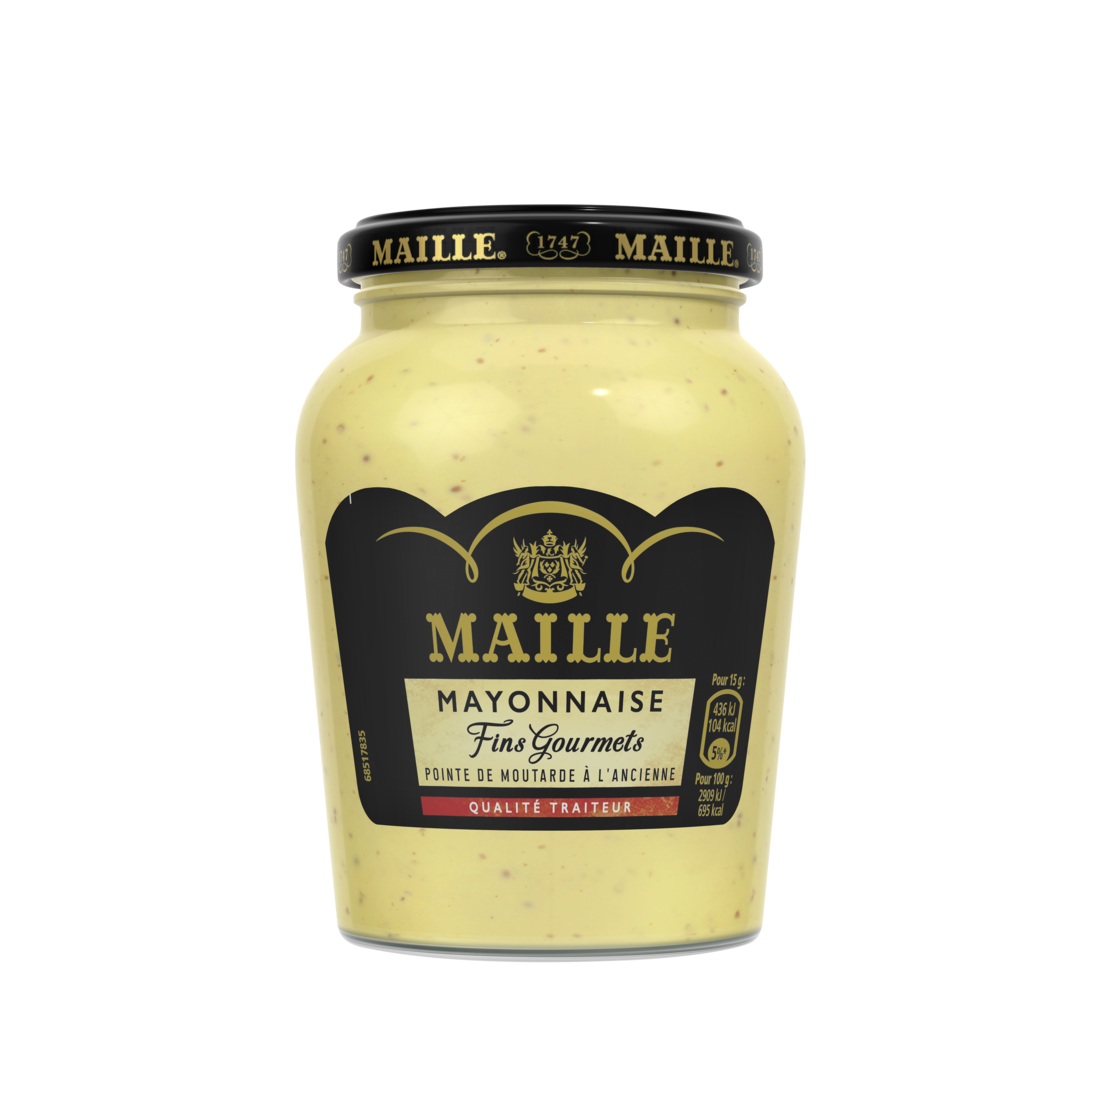 MAILLE Mayonnaise Fins Gourmets